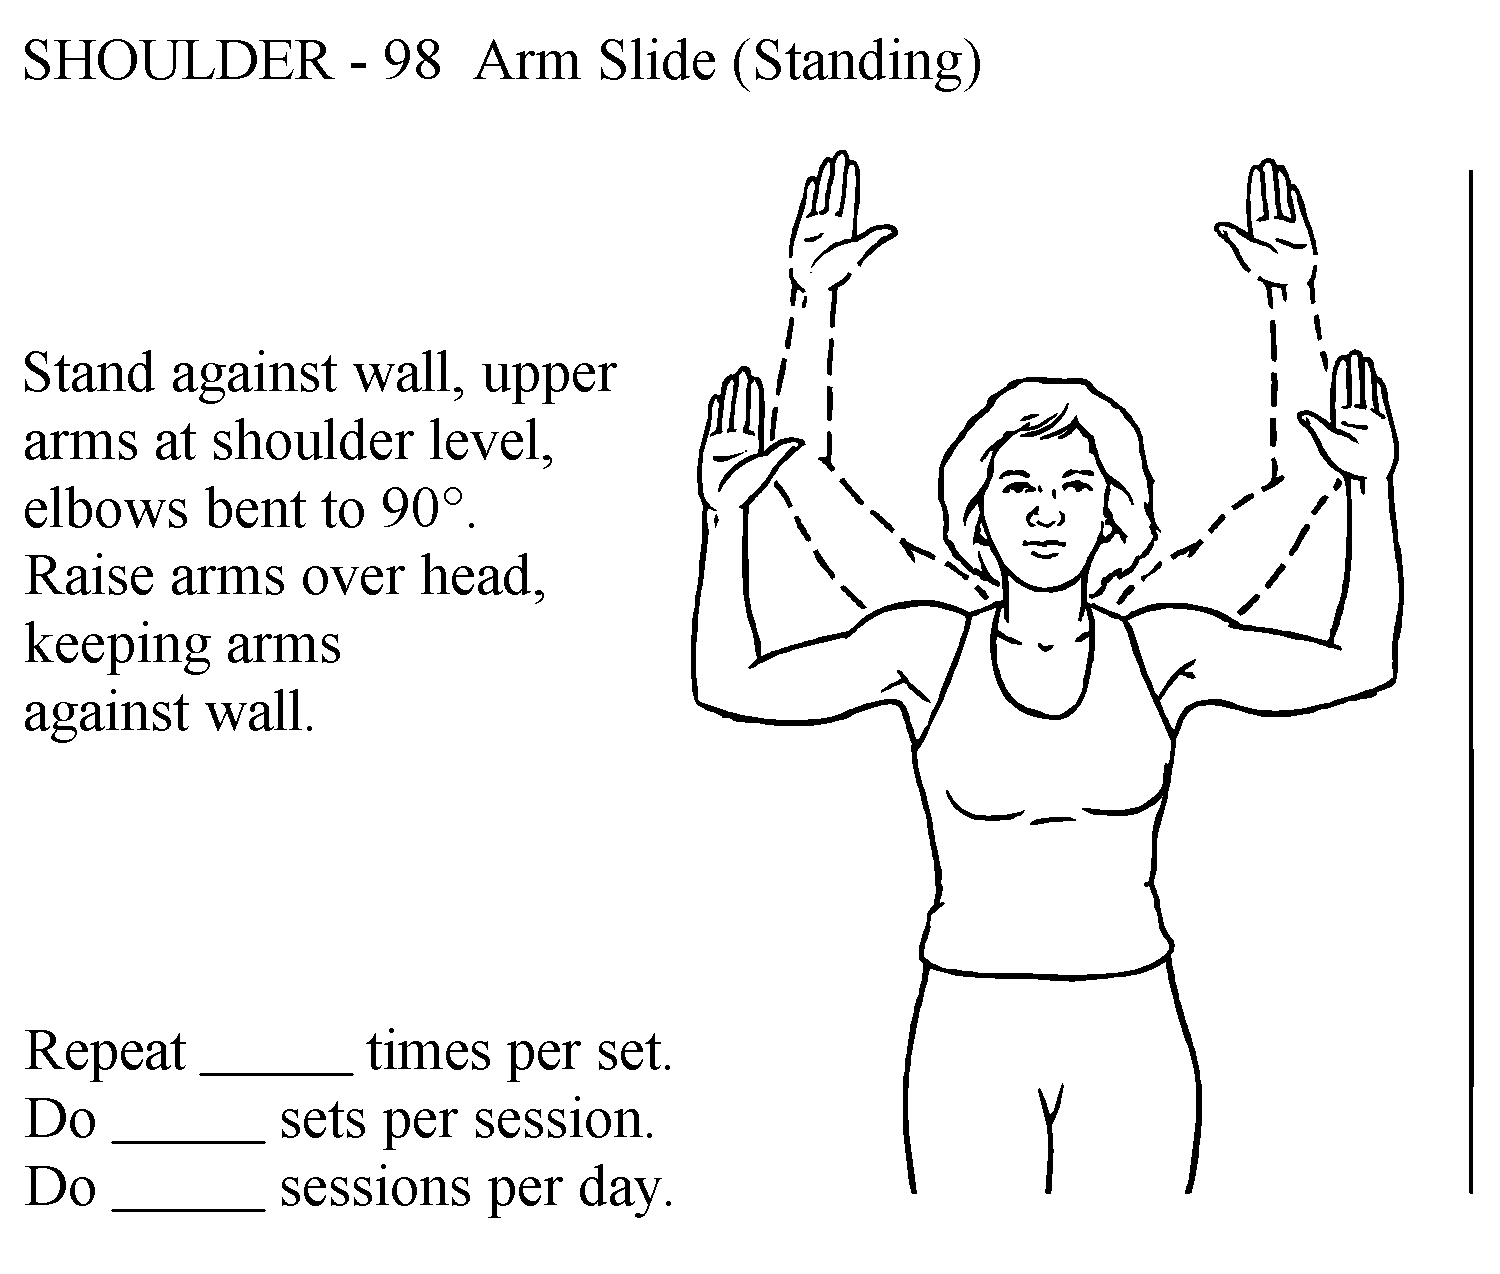 Raising arms into abduction while standing against a wall and maintaining a neutral spine